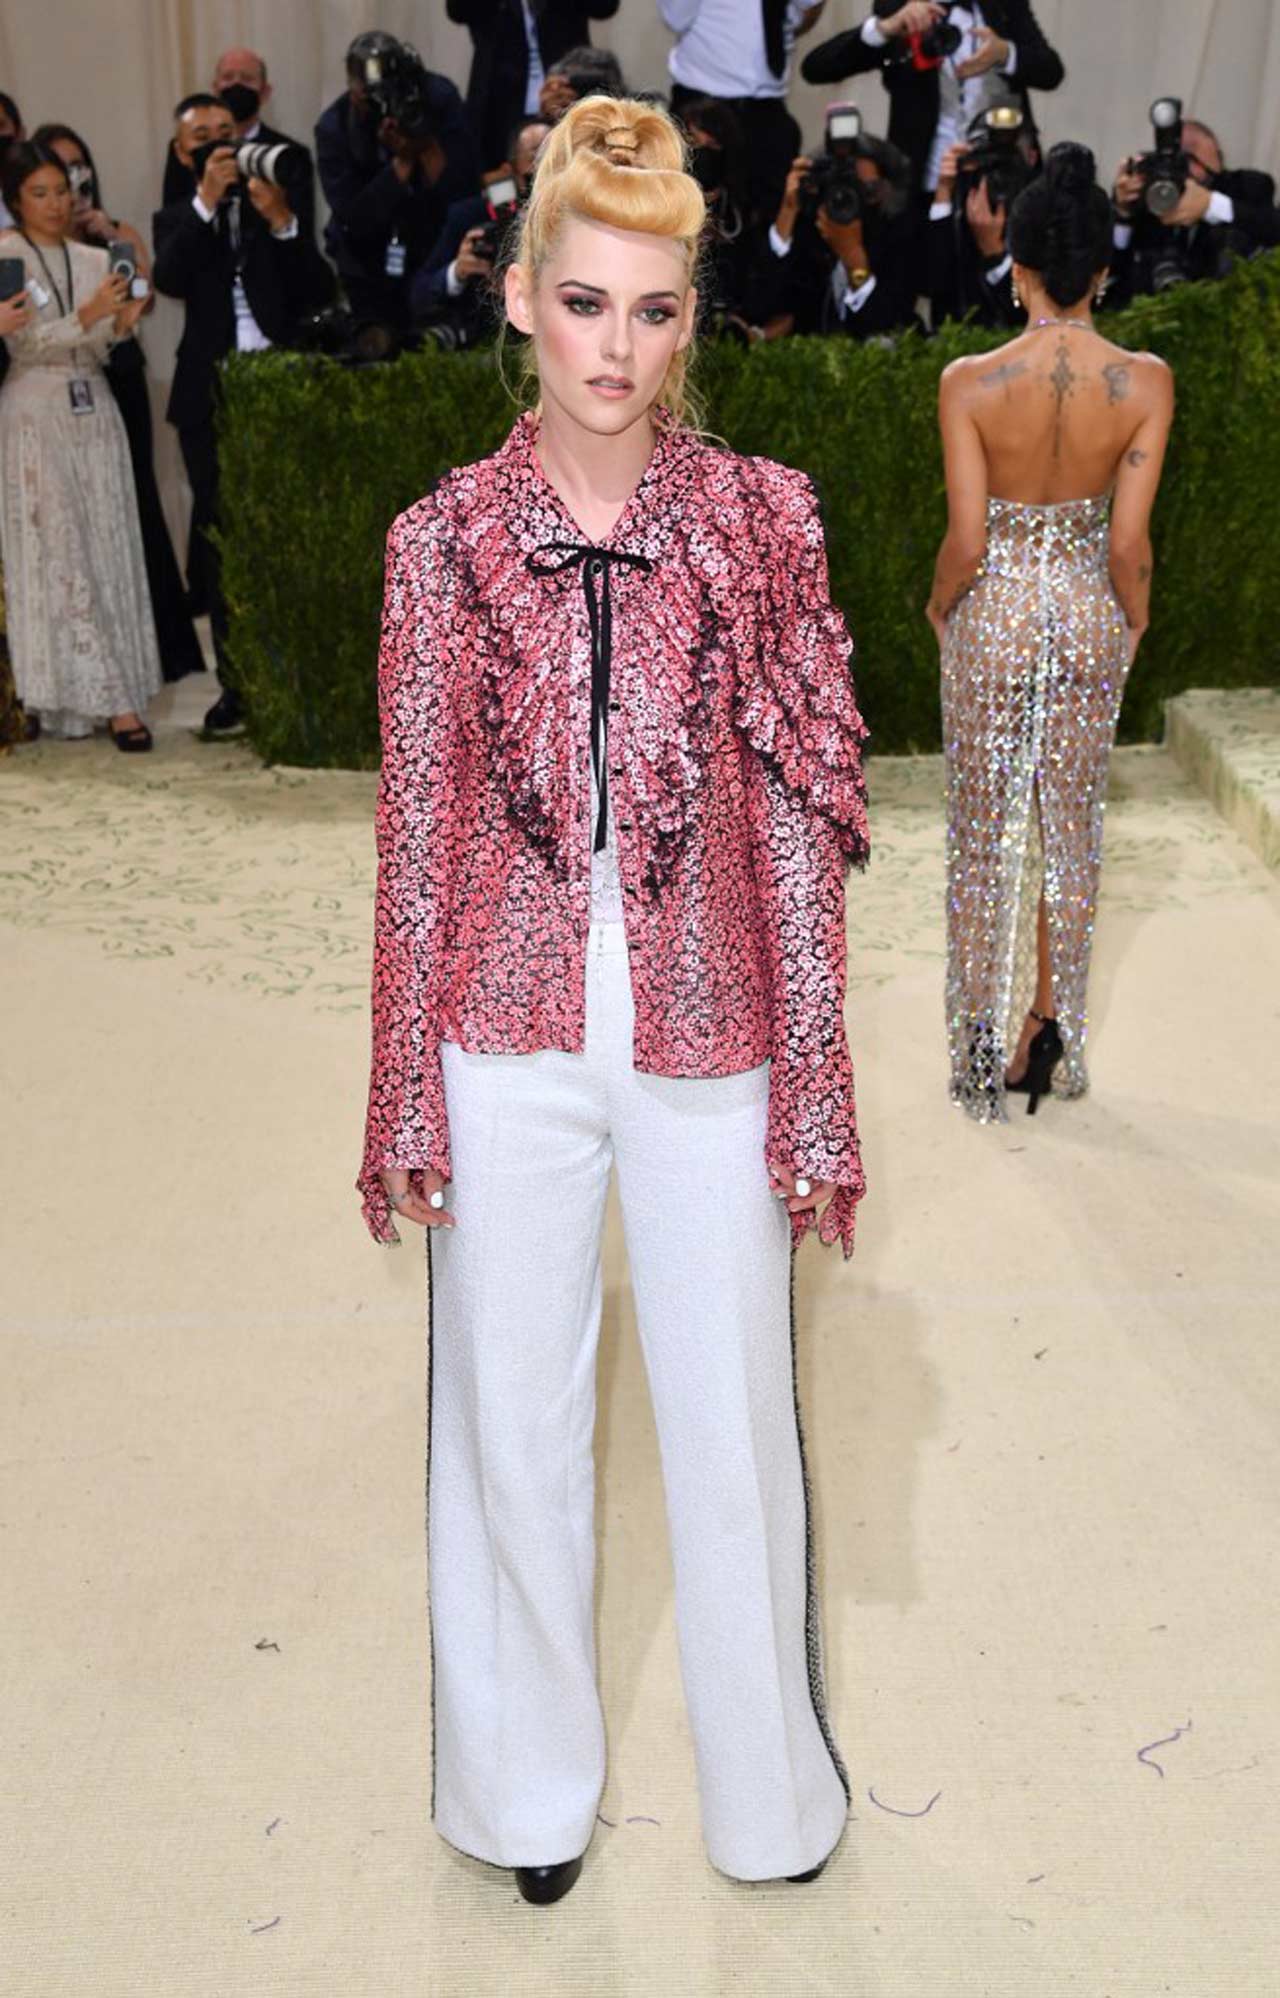 Kristen Stewart made a fashionable appearance at the 2021 Met Gala, rocking an edgy and stylish outfit. The actor graced the Met carpet in a pink Chanel jacket and white pants that were everything fans hoped for and more.